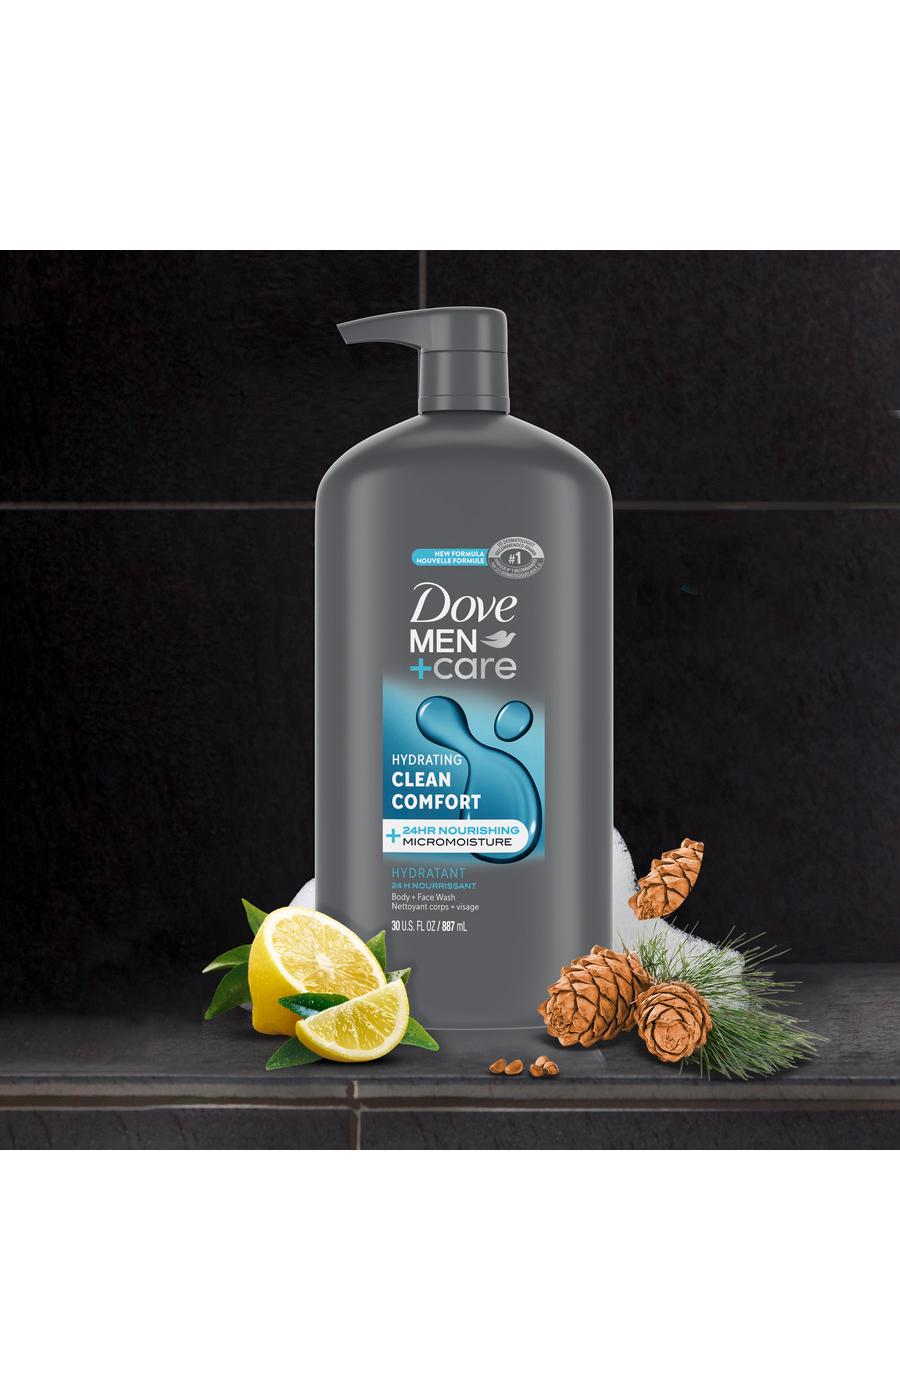 Dove Men+Care Hydrating Body + Face Wash - Clean Comfort; image 4 of 6